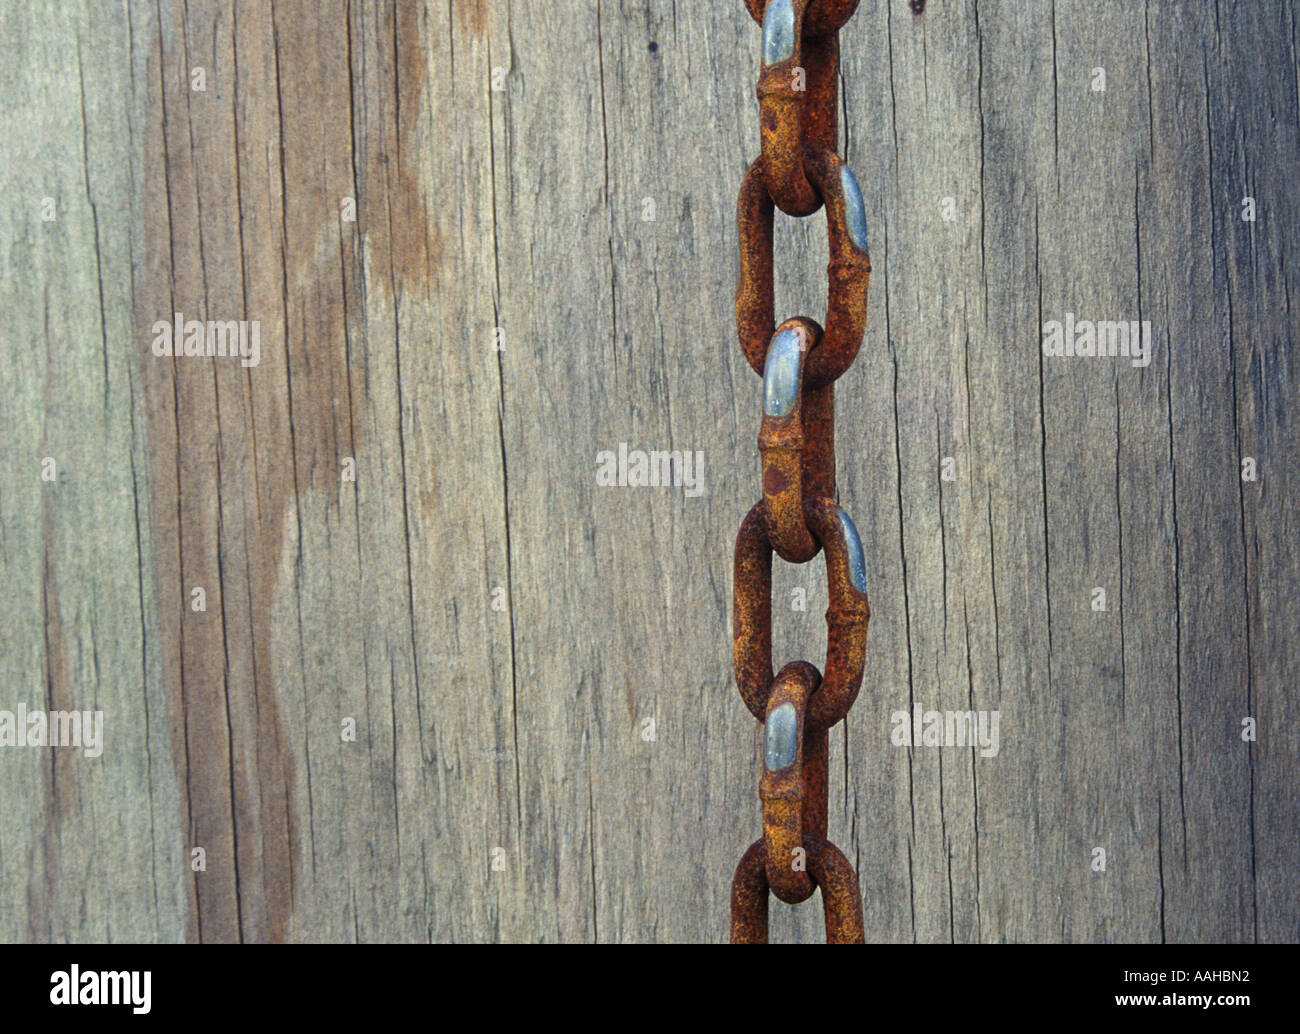 old chain hanging Stock Photo